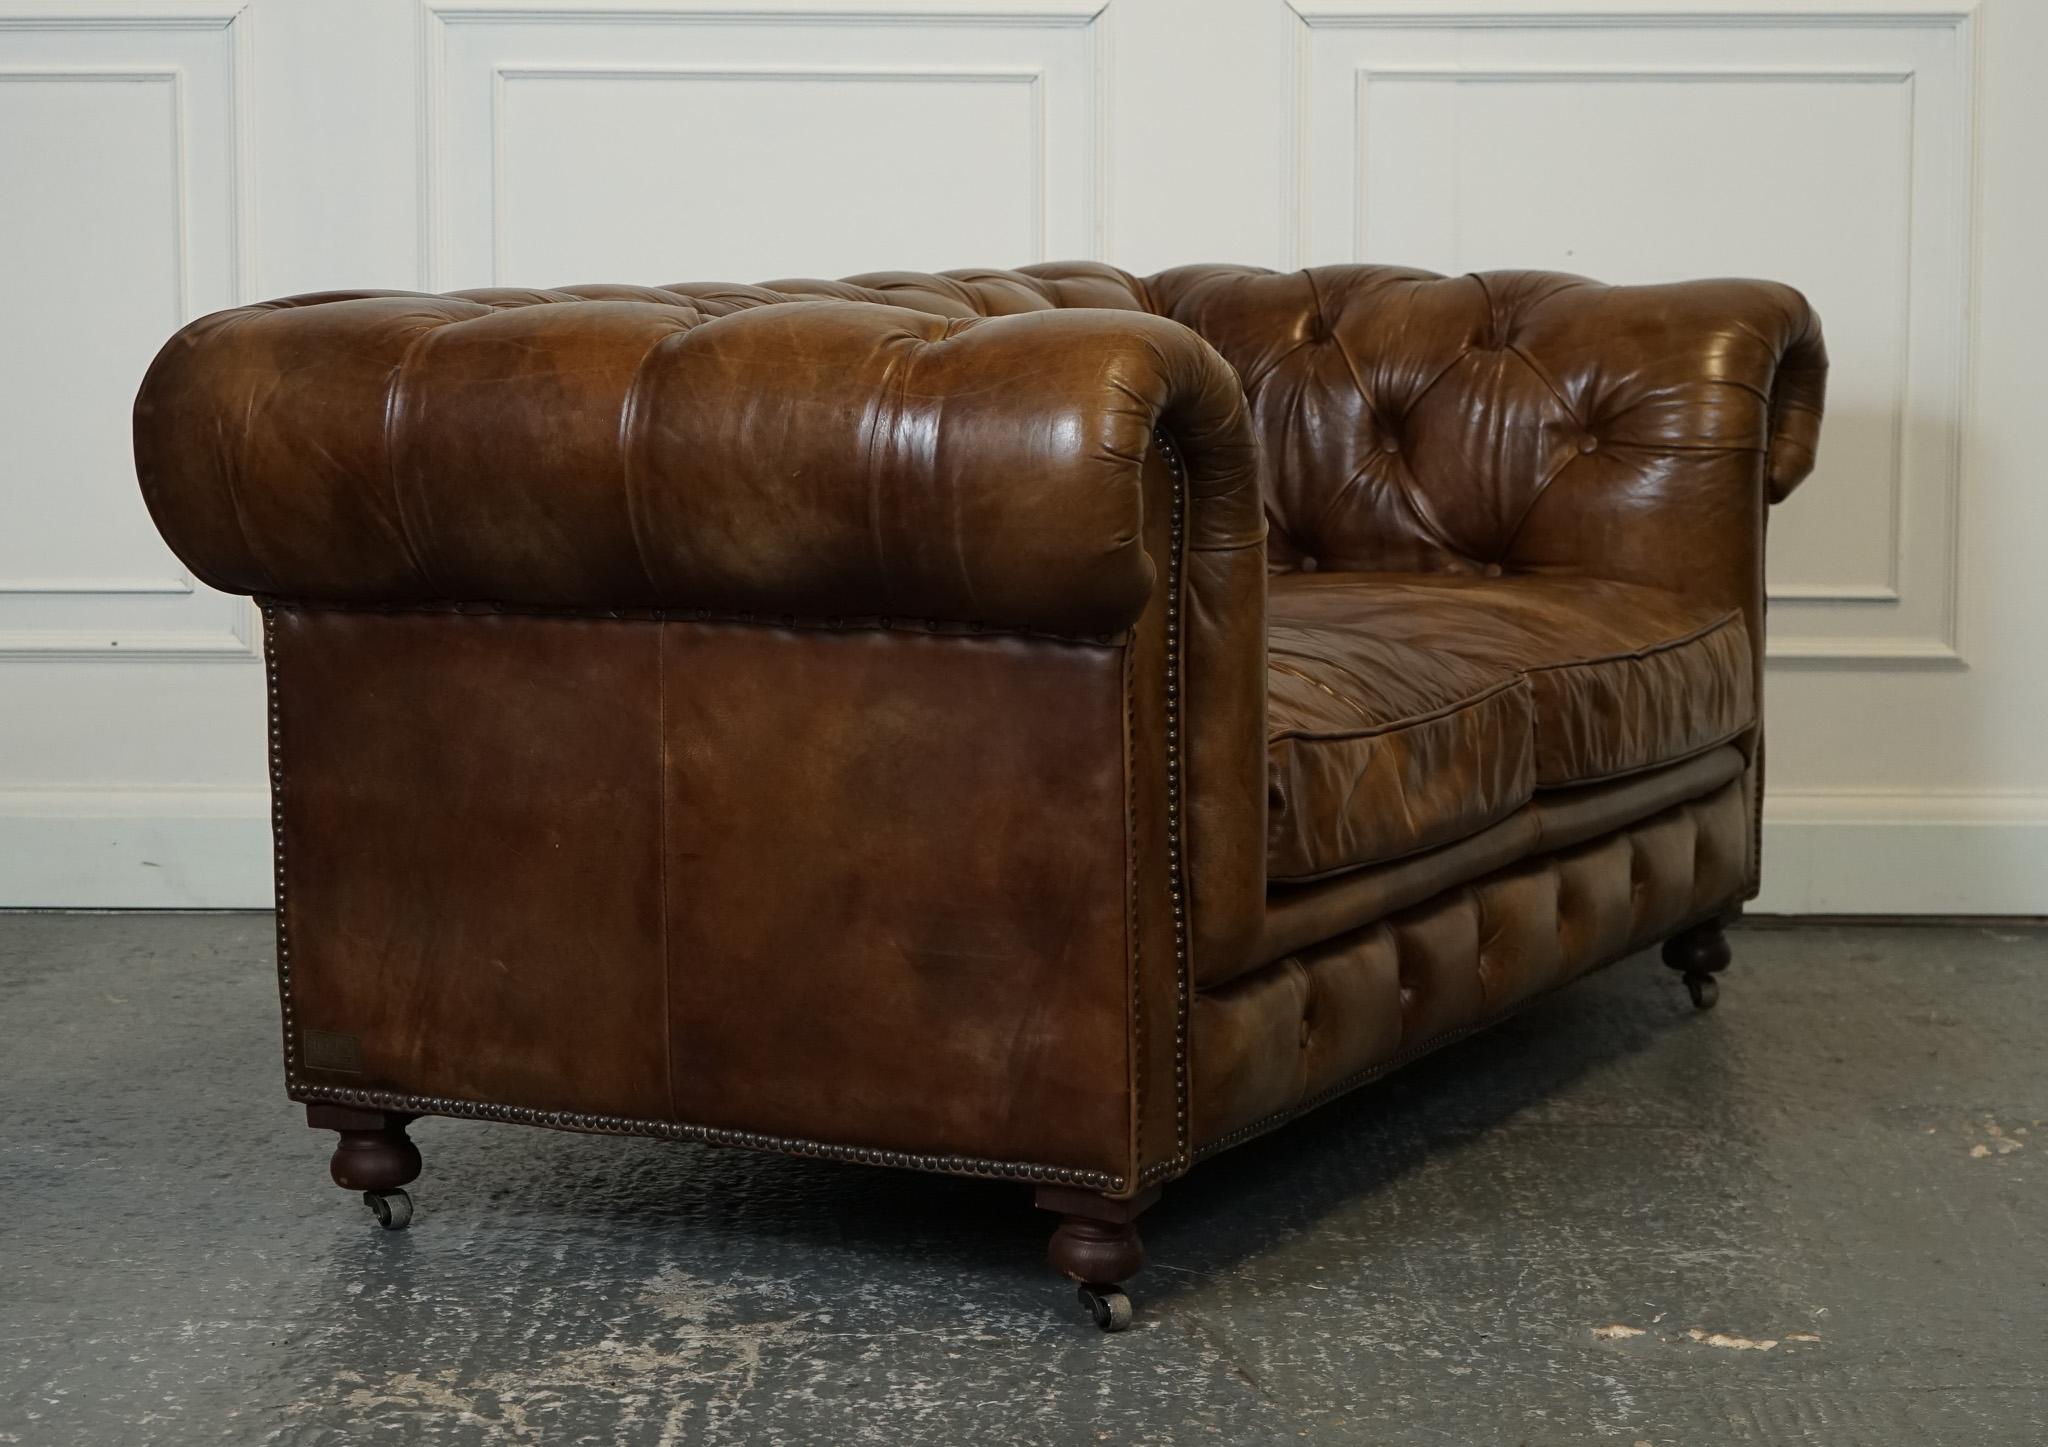 GORGEOUS TIMOTHY OULTON CHESTERFIELD SOFA BY HALO HERiTAGE BROWN LEATHER J1 In Good Condition For Sale In Pulborough, GB